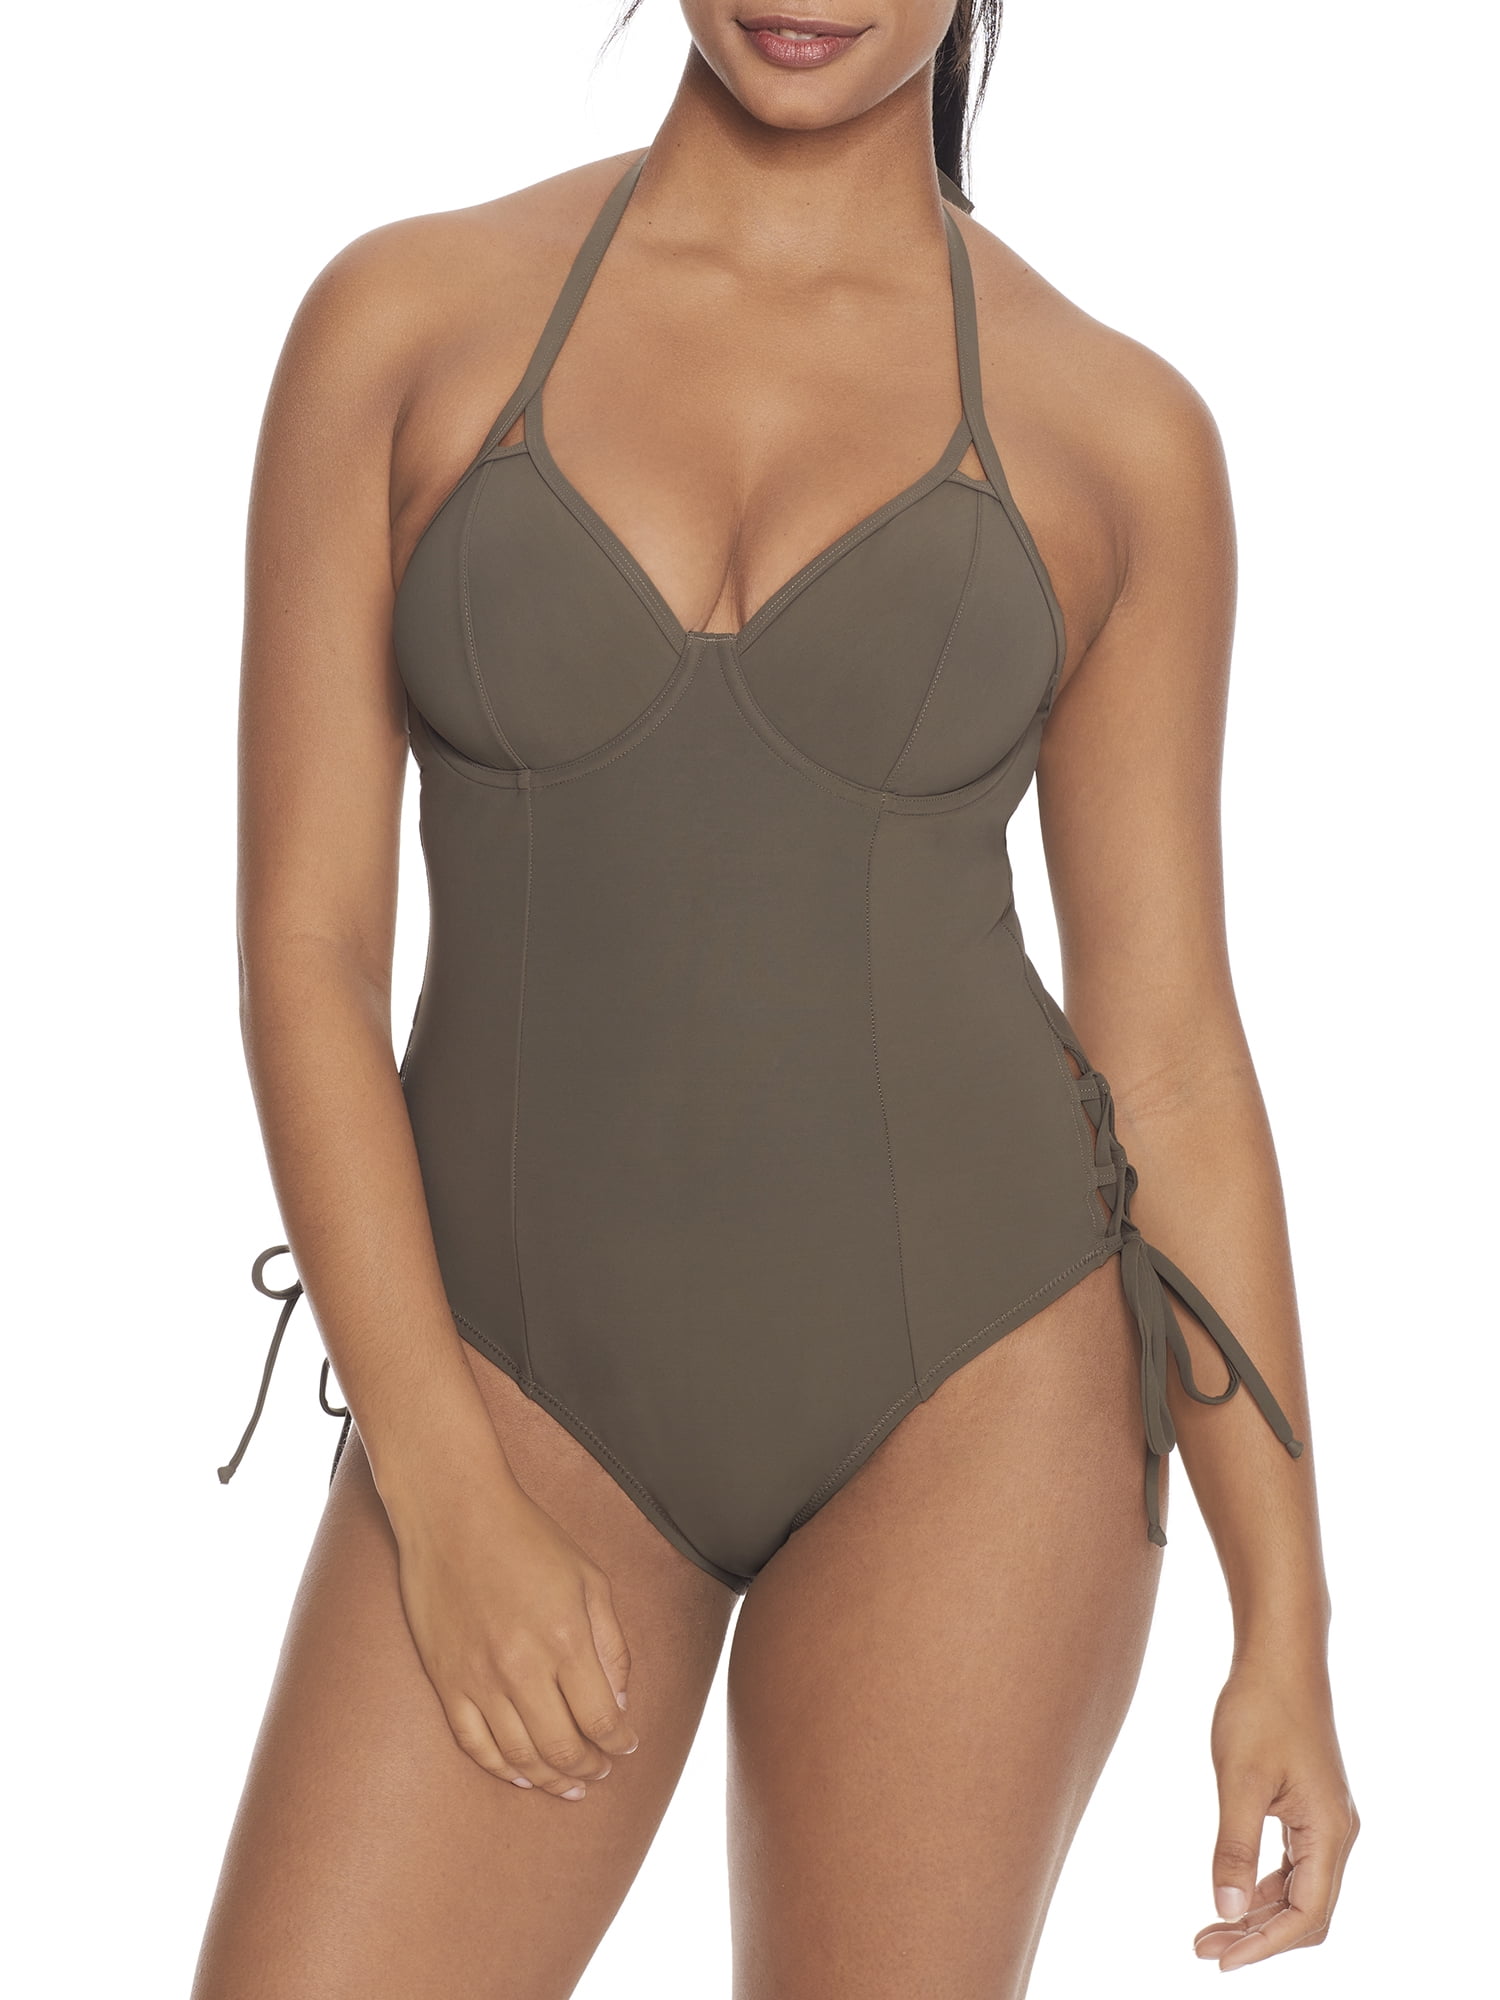 Miss Mandalay OLIVE Icon Plunge Underwire One-Piece Swimsuit, US